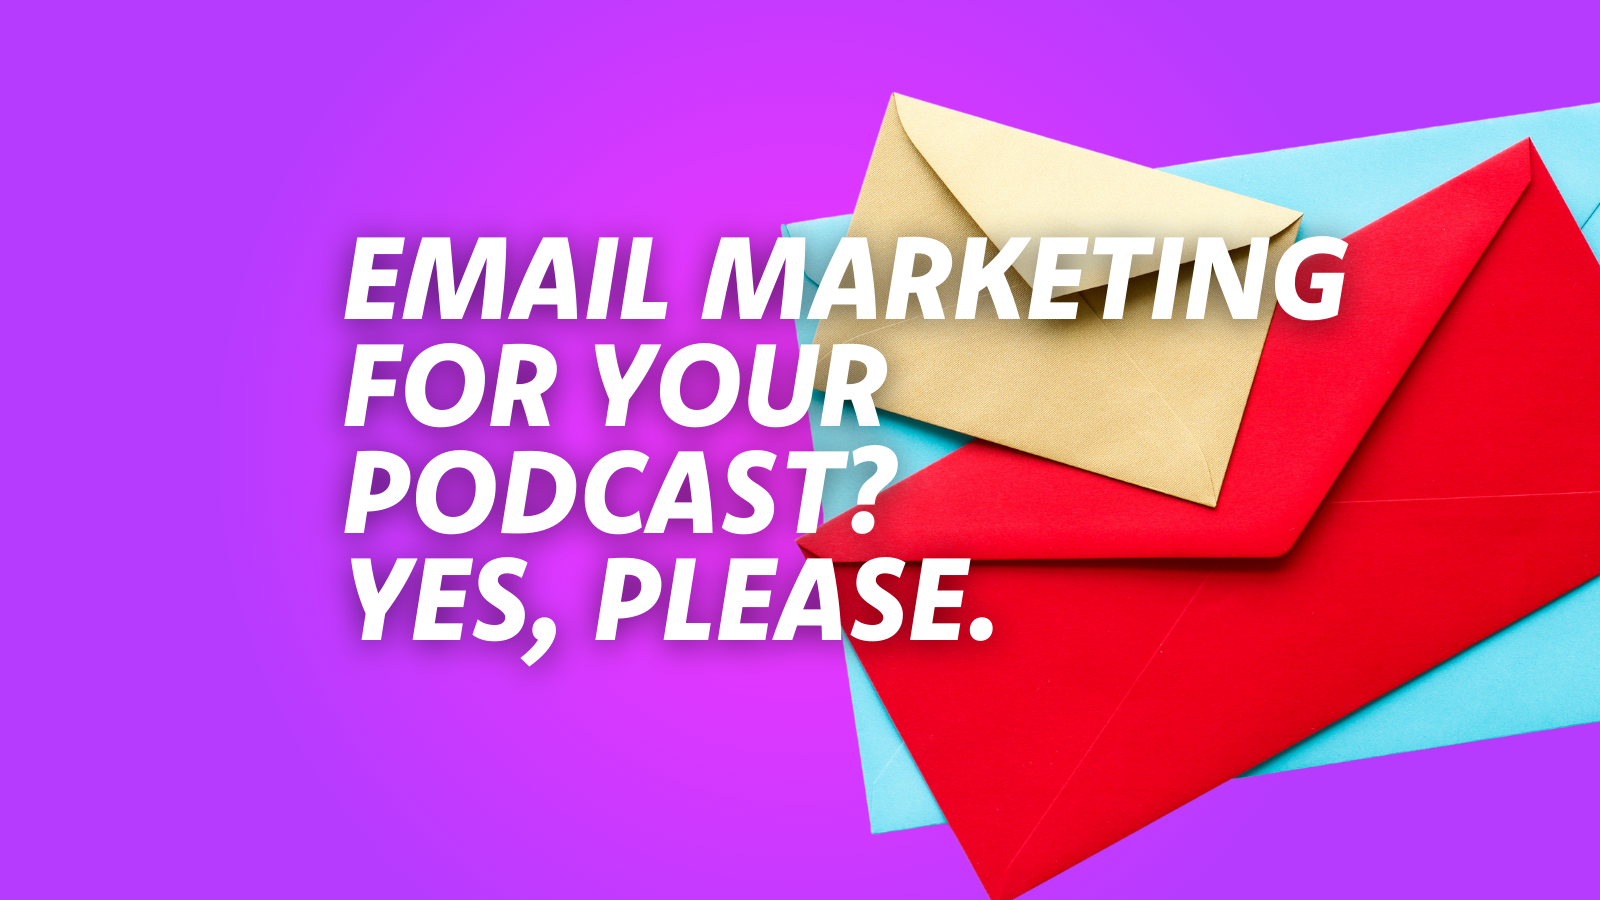 The Secret to Growing Your Podcast Audience with Email Marketing